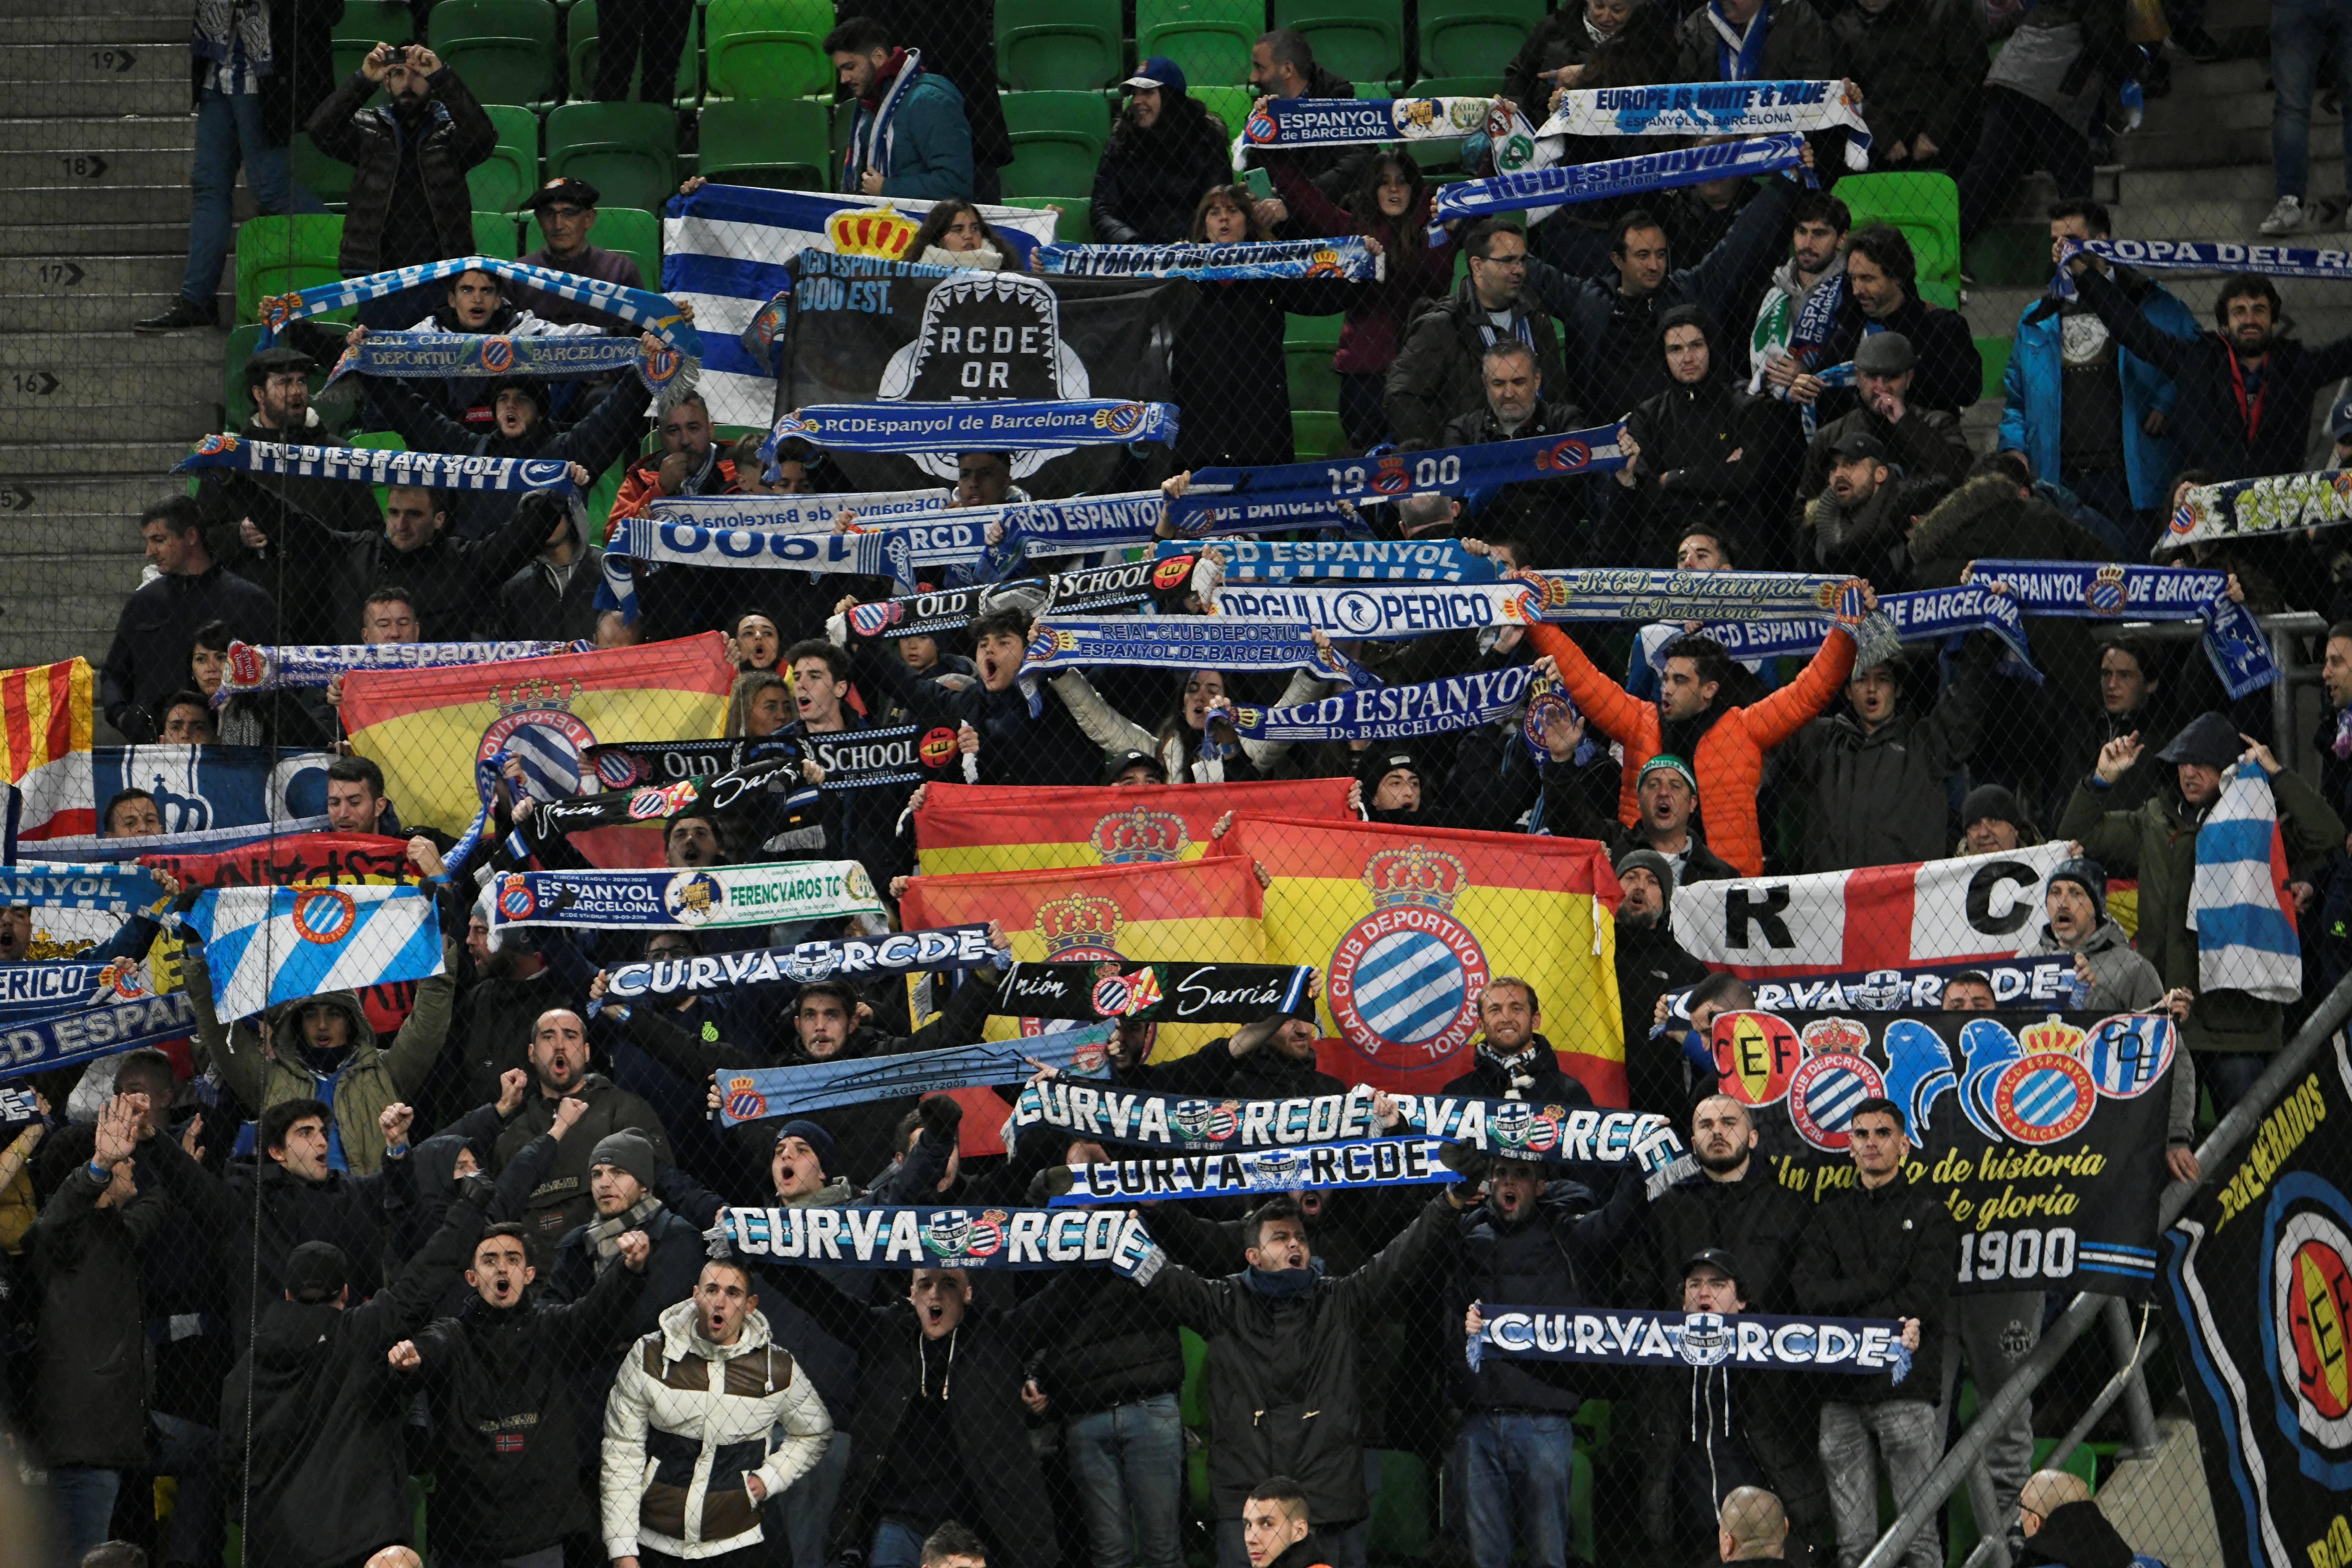 Espanyol fans in Hungary celebrate topping their Europa League group (by REUTERS/Tamas Kaszas)